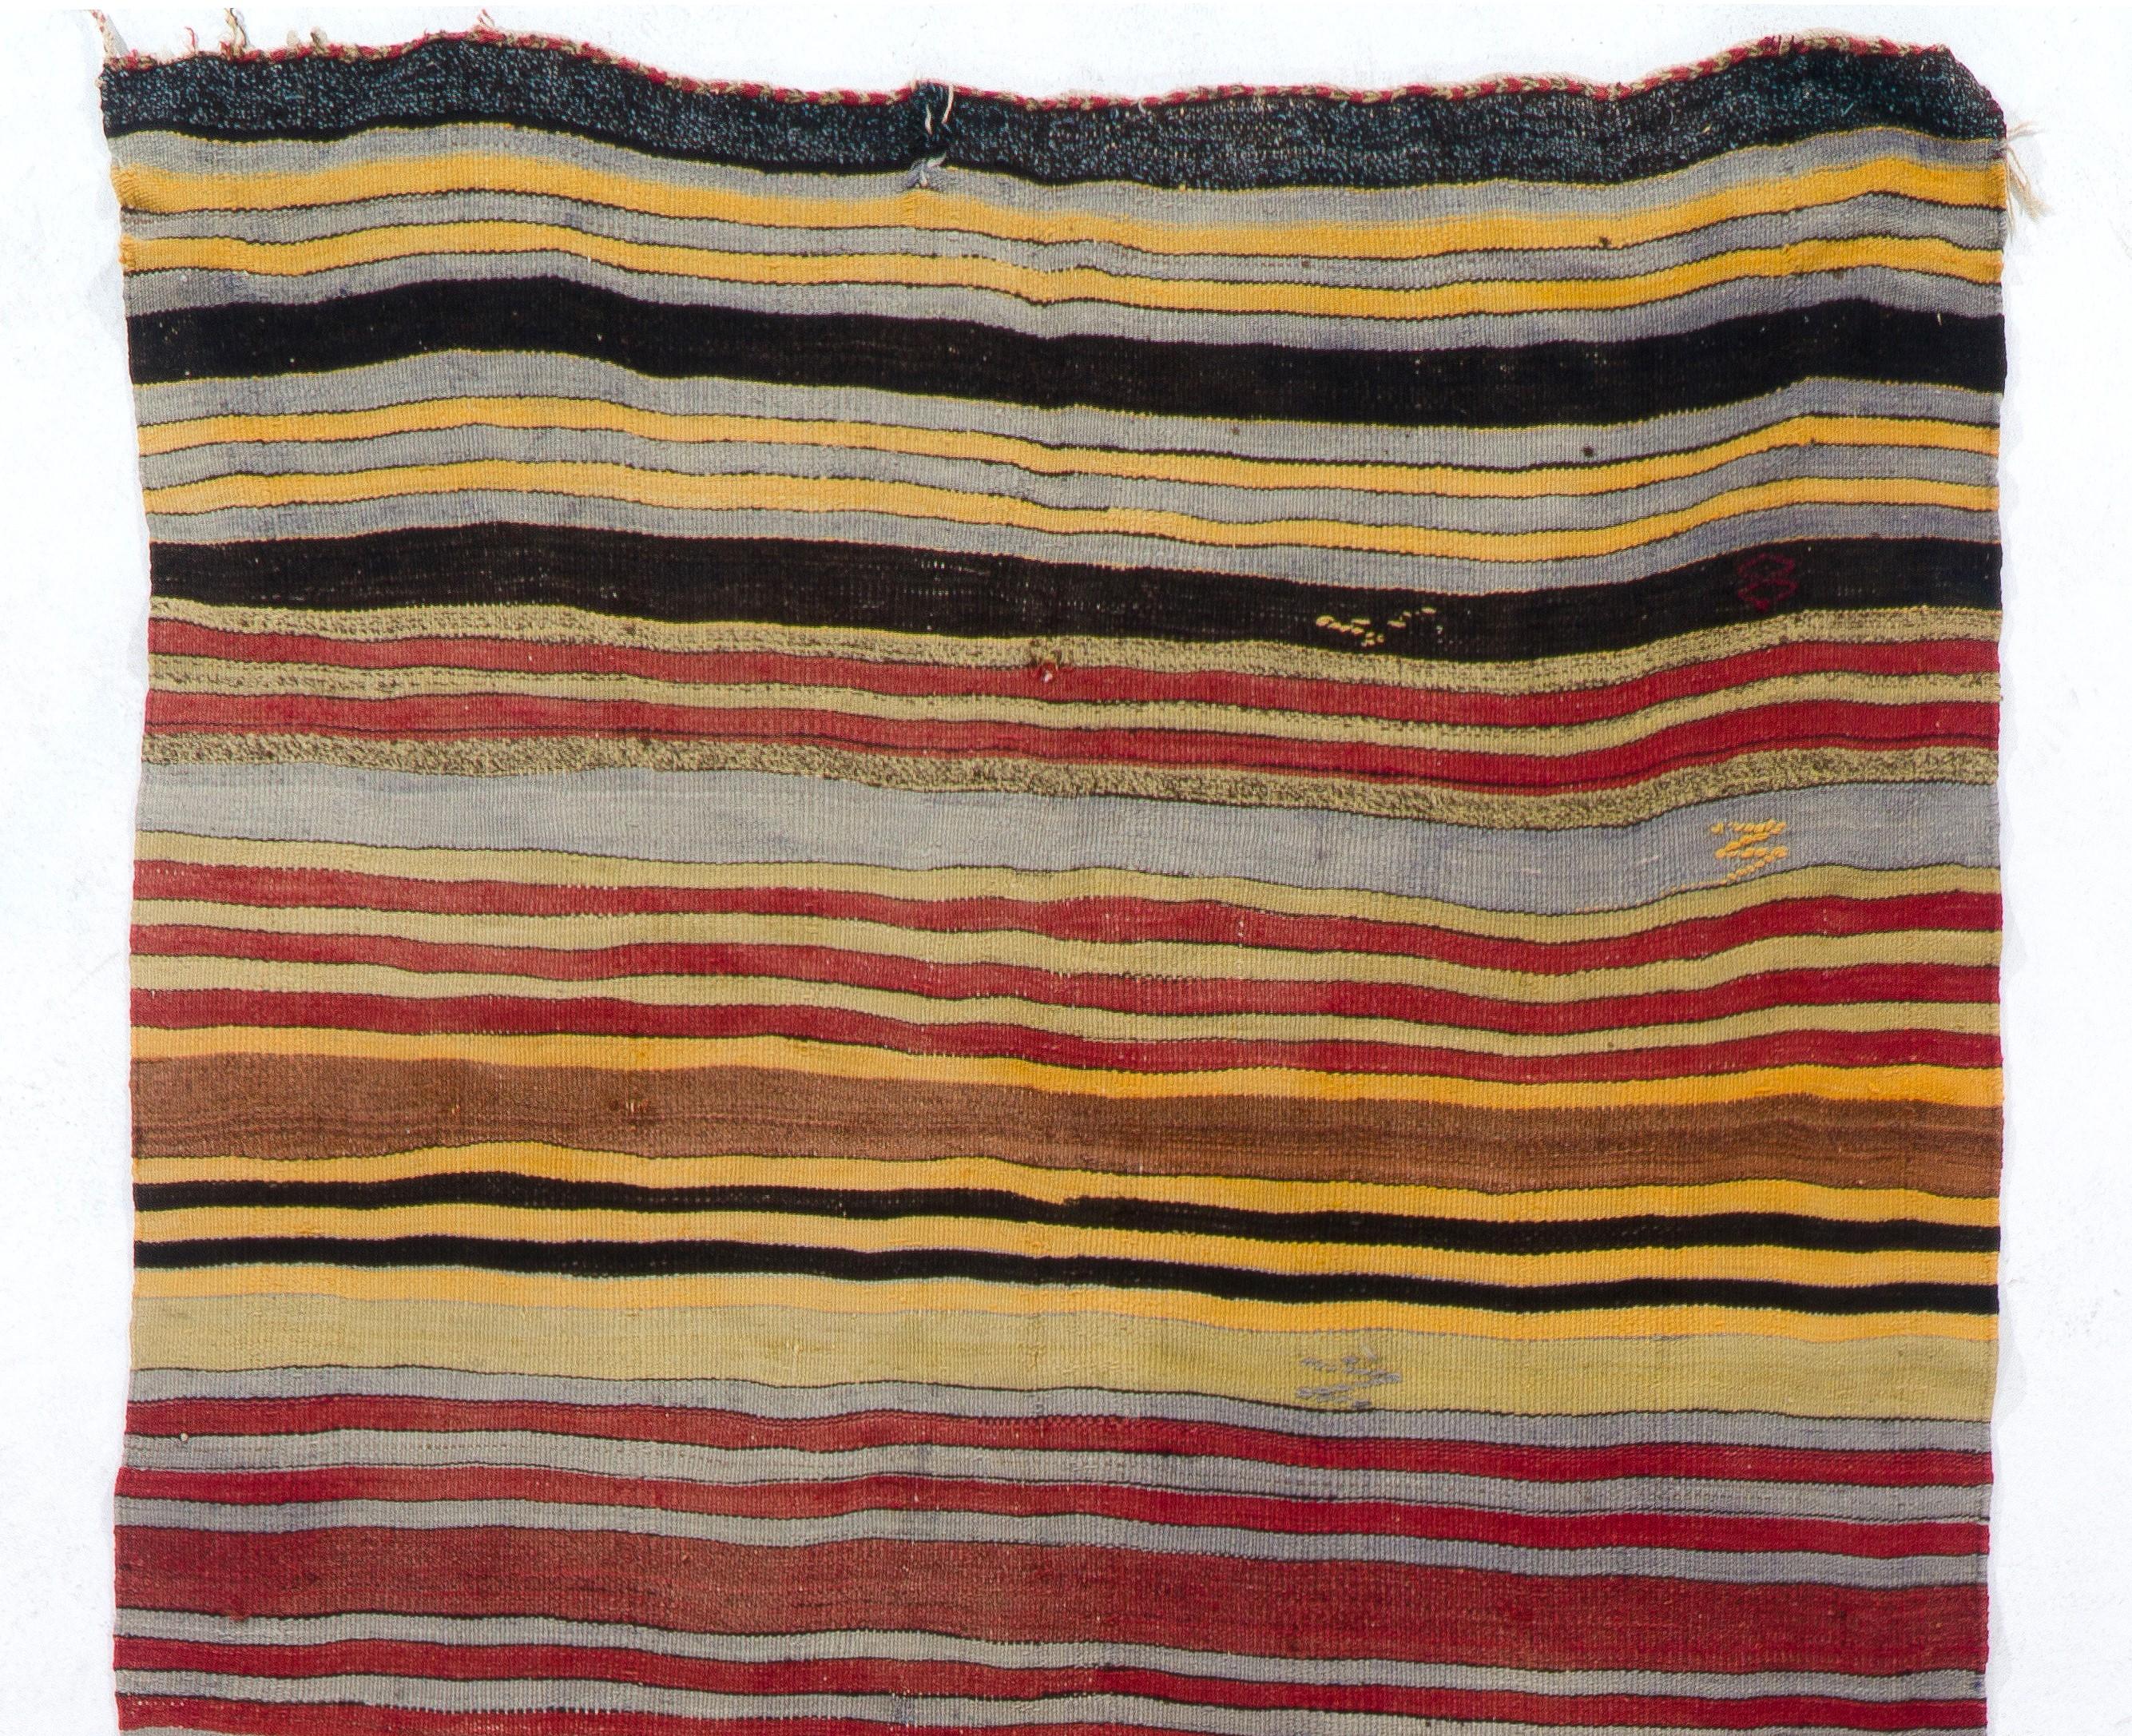 Vintage handwoven flat-weave (Kilim) with striped design, 100% wool. Measures: 4.7 x 11.2 Ft
We can modify the dimensions if requested, i.e. make it shorter and/or narrower.
Reversible; both sides can be used.
Ideal for both residential and